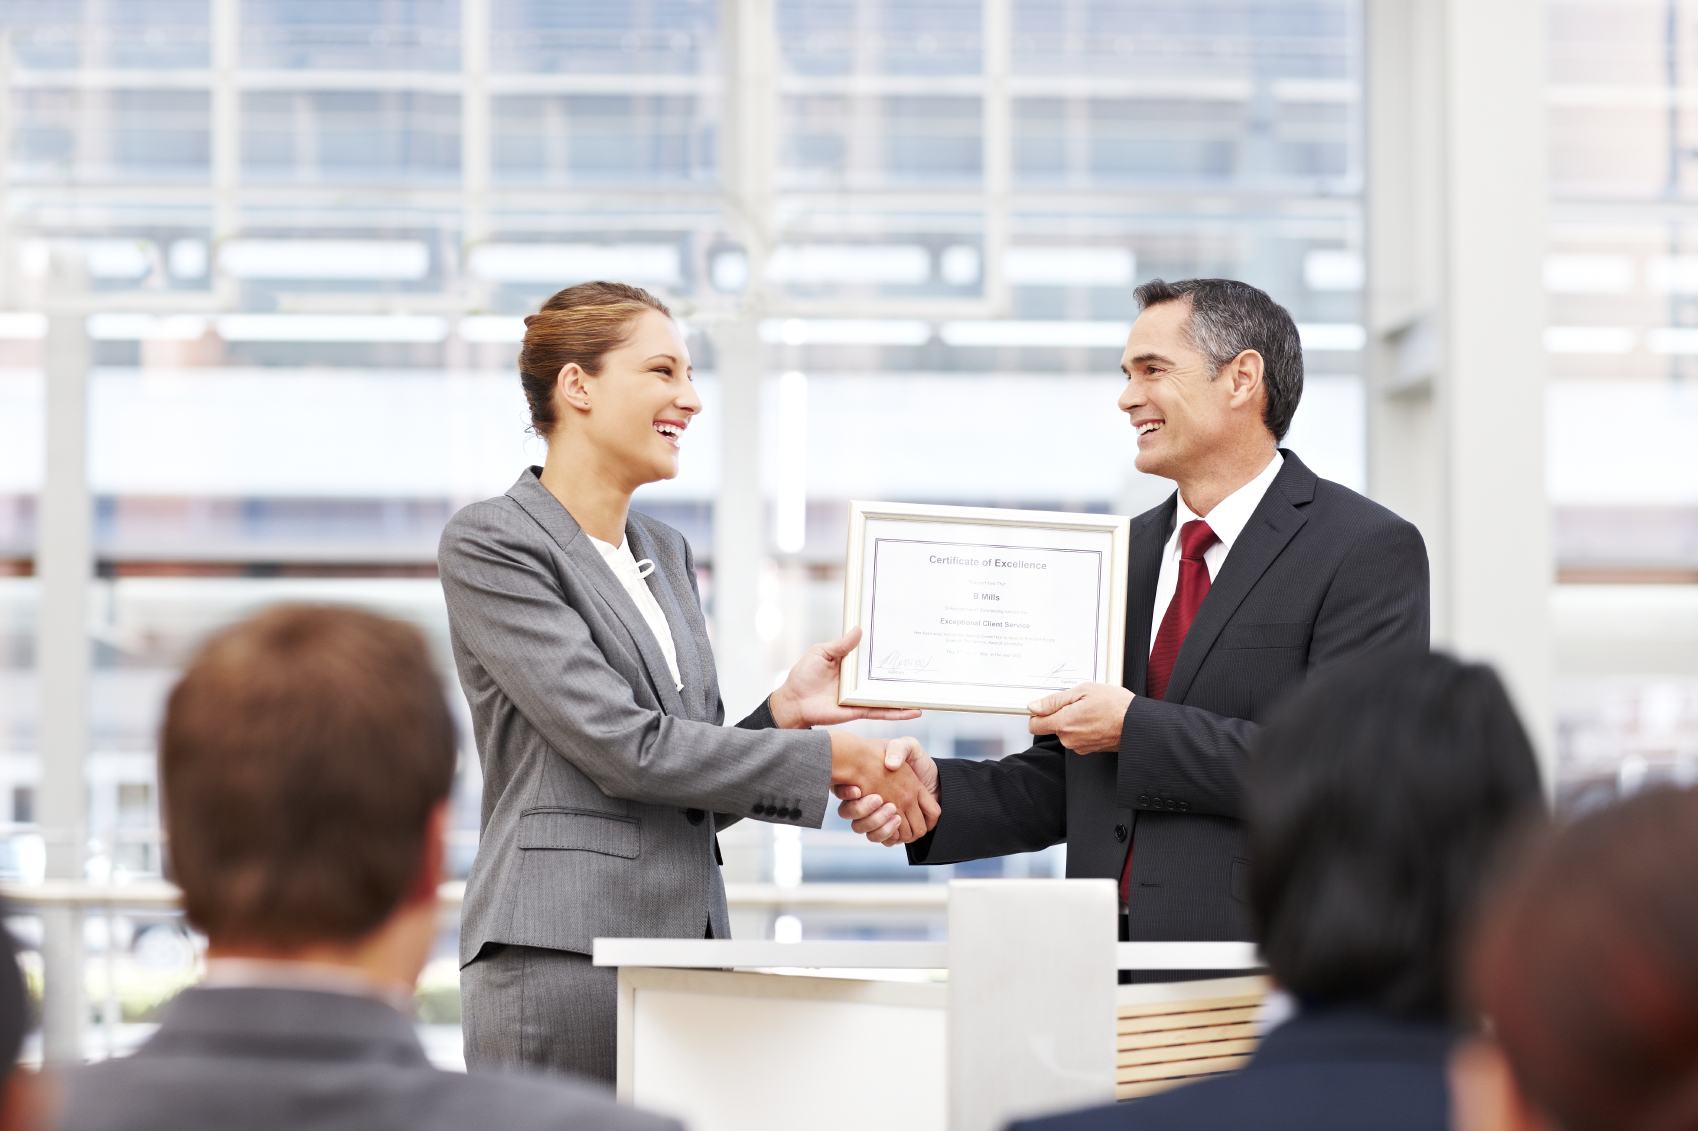 Businesswoman shakes the hand of a man giving her an award on stage. Horizontal shot.